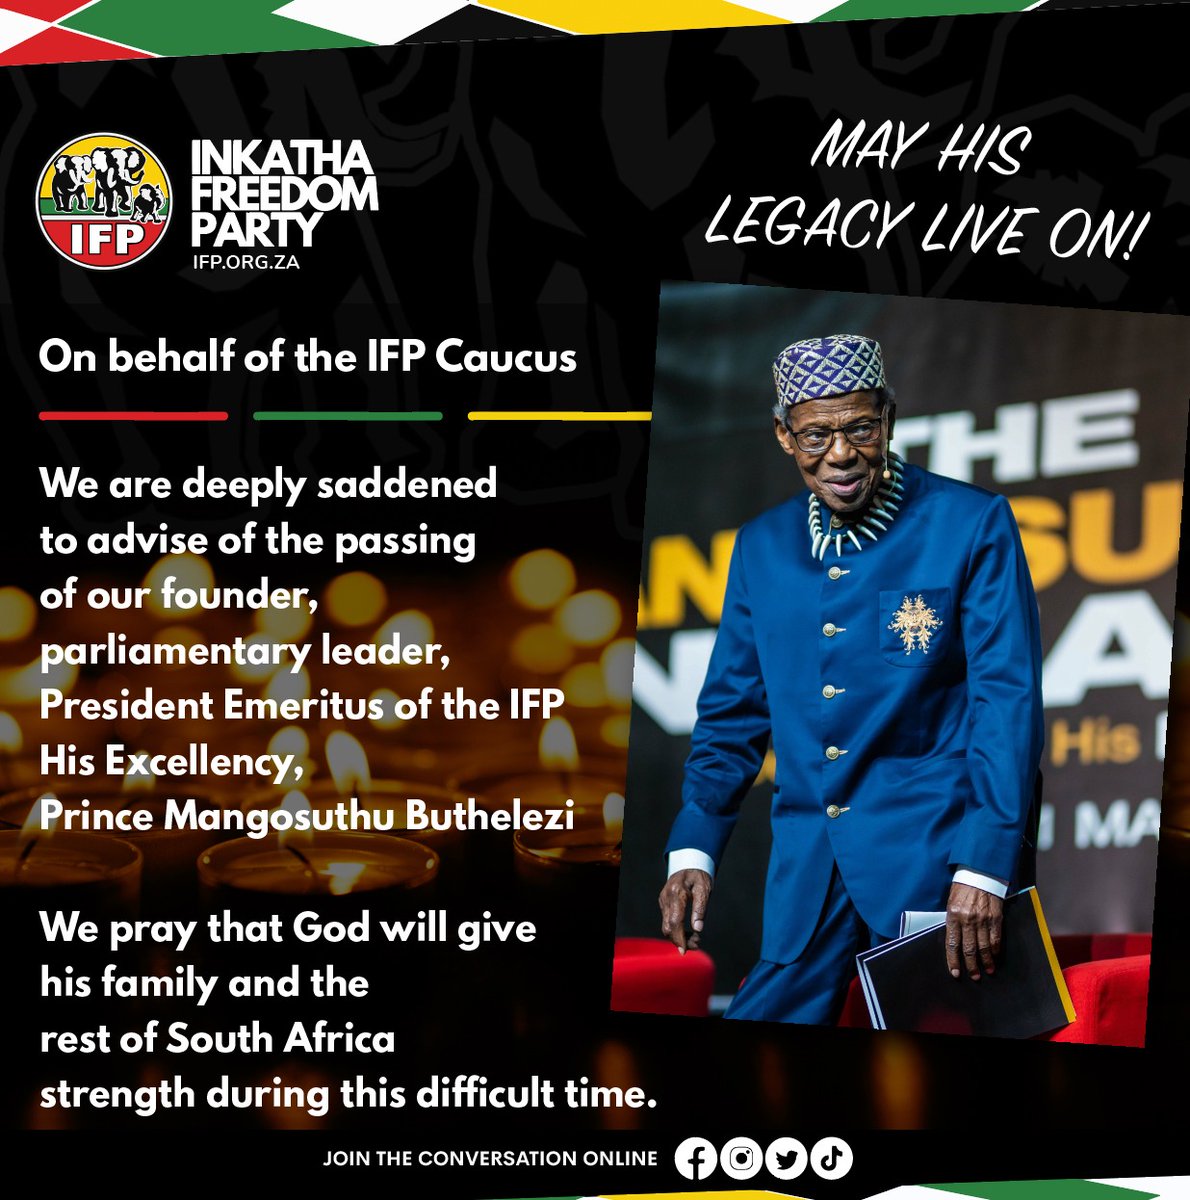 Inkatha Freedom Party (IFP) Caucus, extend our deepest and most heartfelt condolences to the Buthelezi family on the passing of our Founder, Leader in Parliament, and President Emeritus of the IFP Words cannot express our loss.